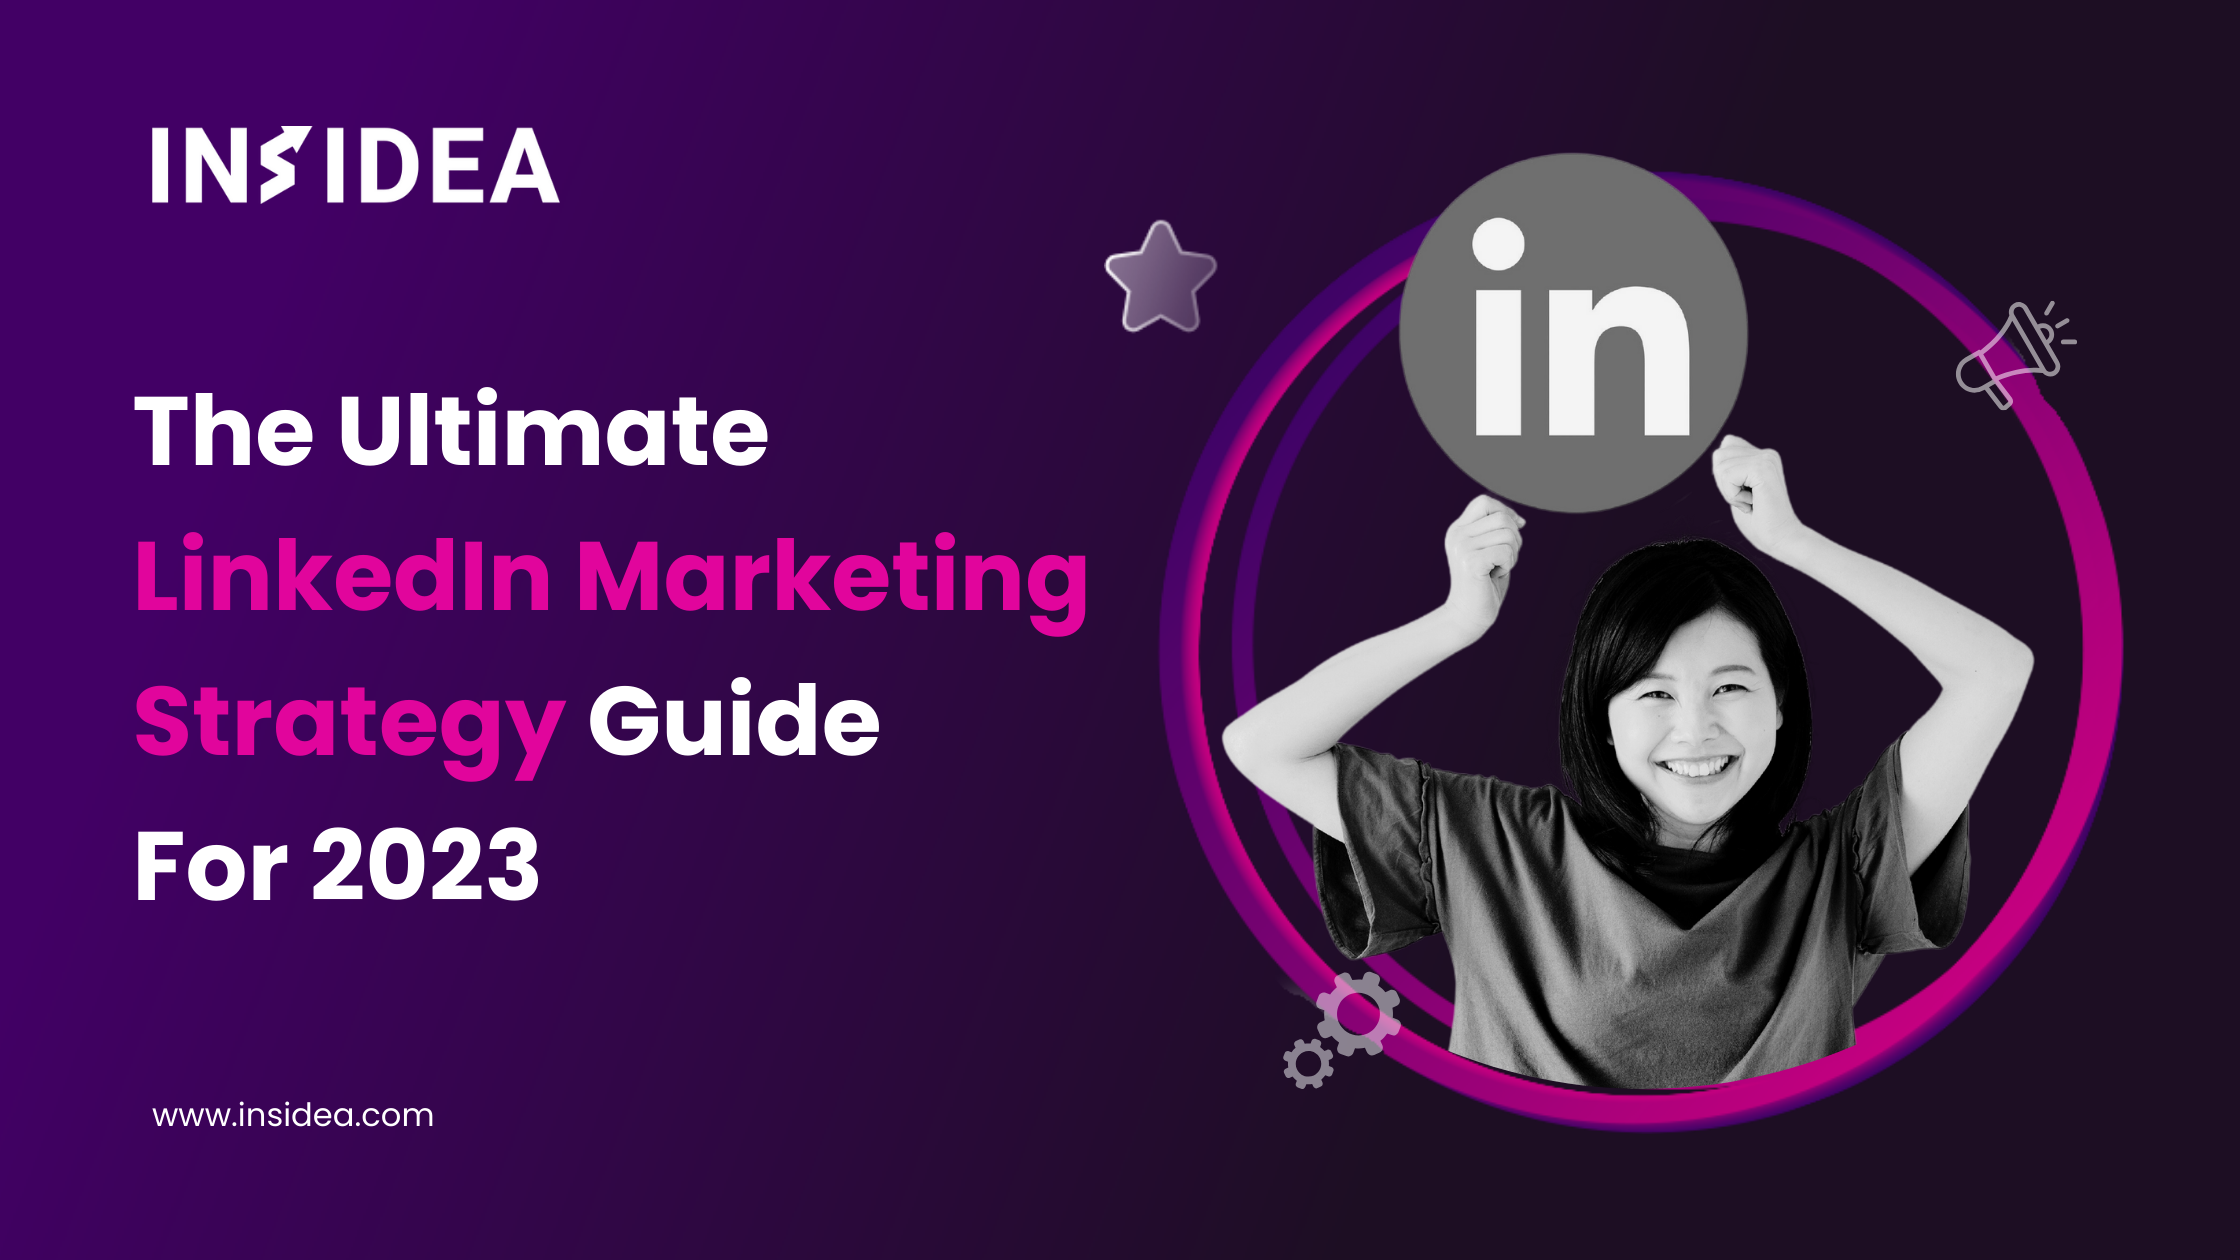 The Ultimate LinkedIn Marketing Strategy Guide For 2023